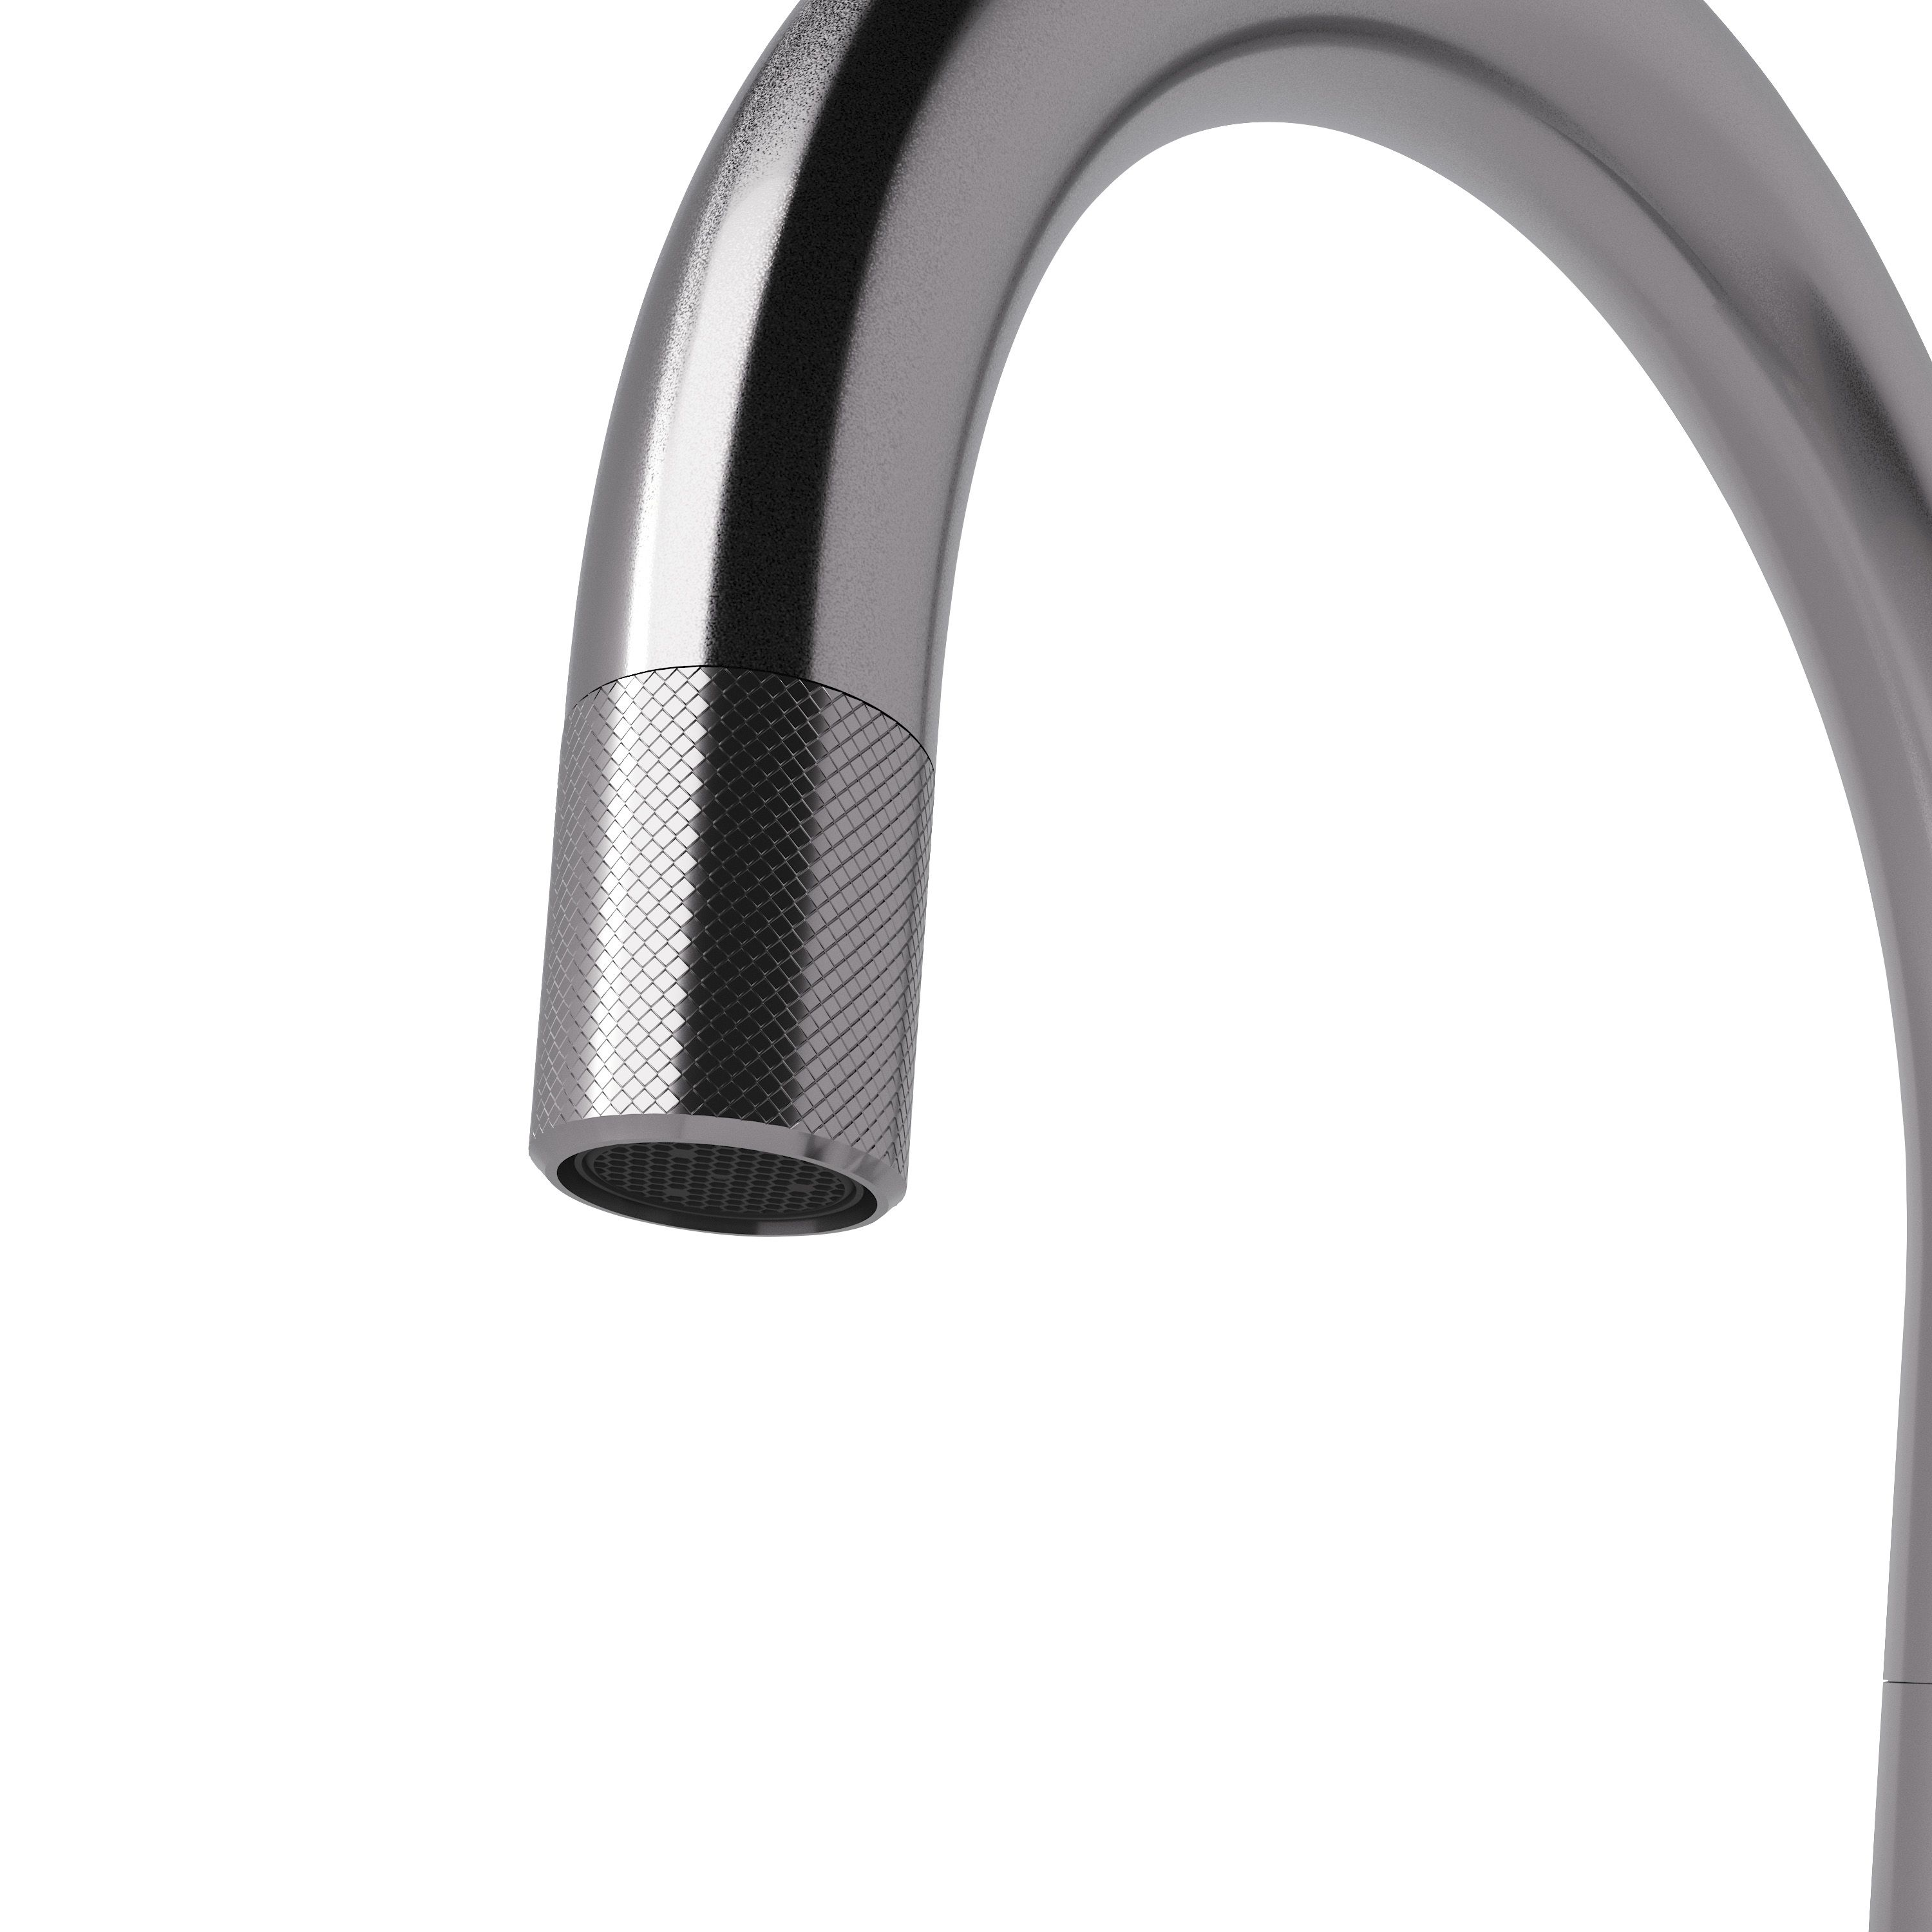 GoodHome Carya Silver Stainless steel effect Kitchen Side lever Tap